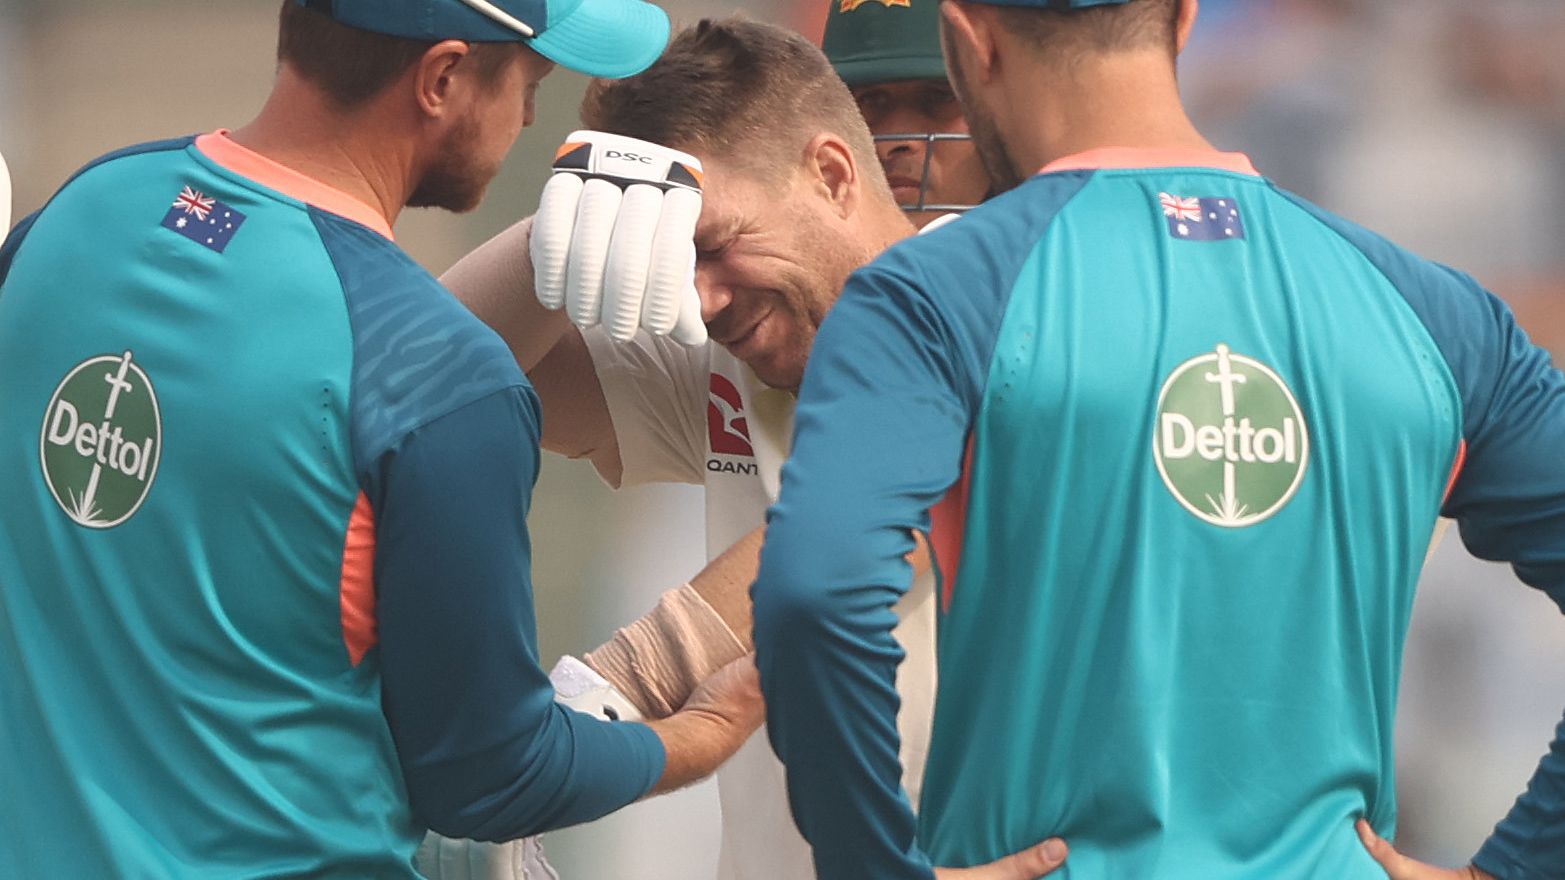 David Warner of Australia has his elbow looked at by medical staff after he was struck by a ball from Mohammed Siraj of India during day one of the Second Test match in the series between India and Australia at Arun Jaitley Stadium on February 17, 2023 in Delhi, India. (Photo by Robert Cianflone/Getty Images)